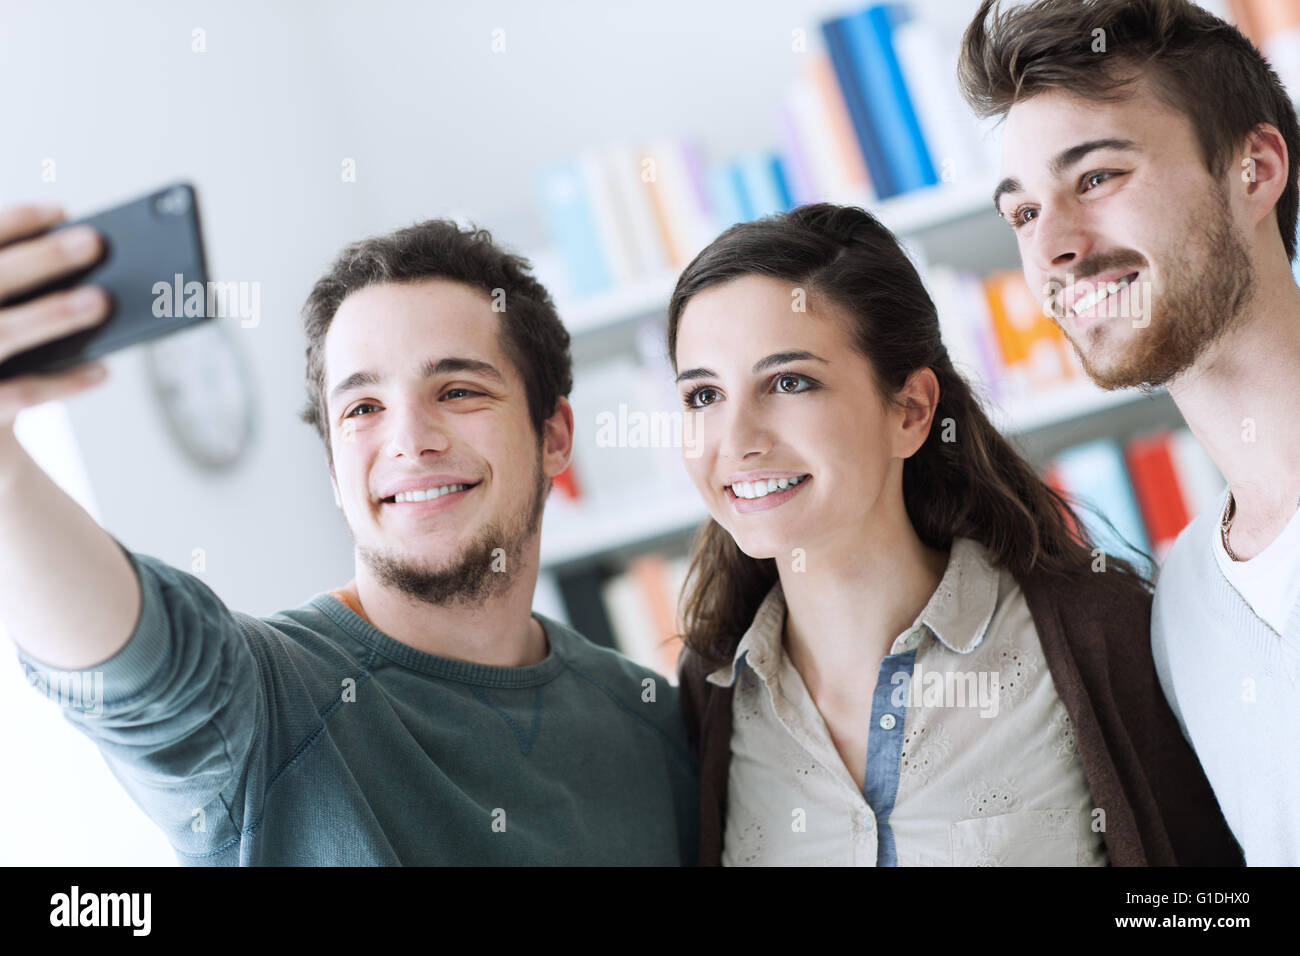 Smiling happy teenagers taking selfies with a mobile phone, sharing, technology and friendship concept Stock Photo